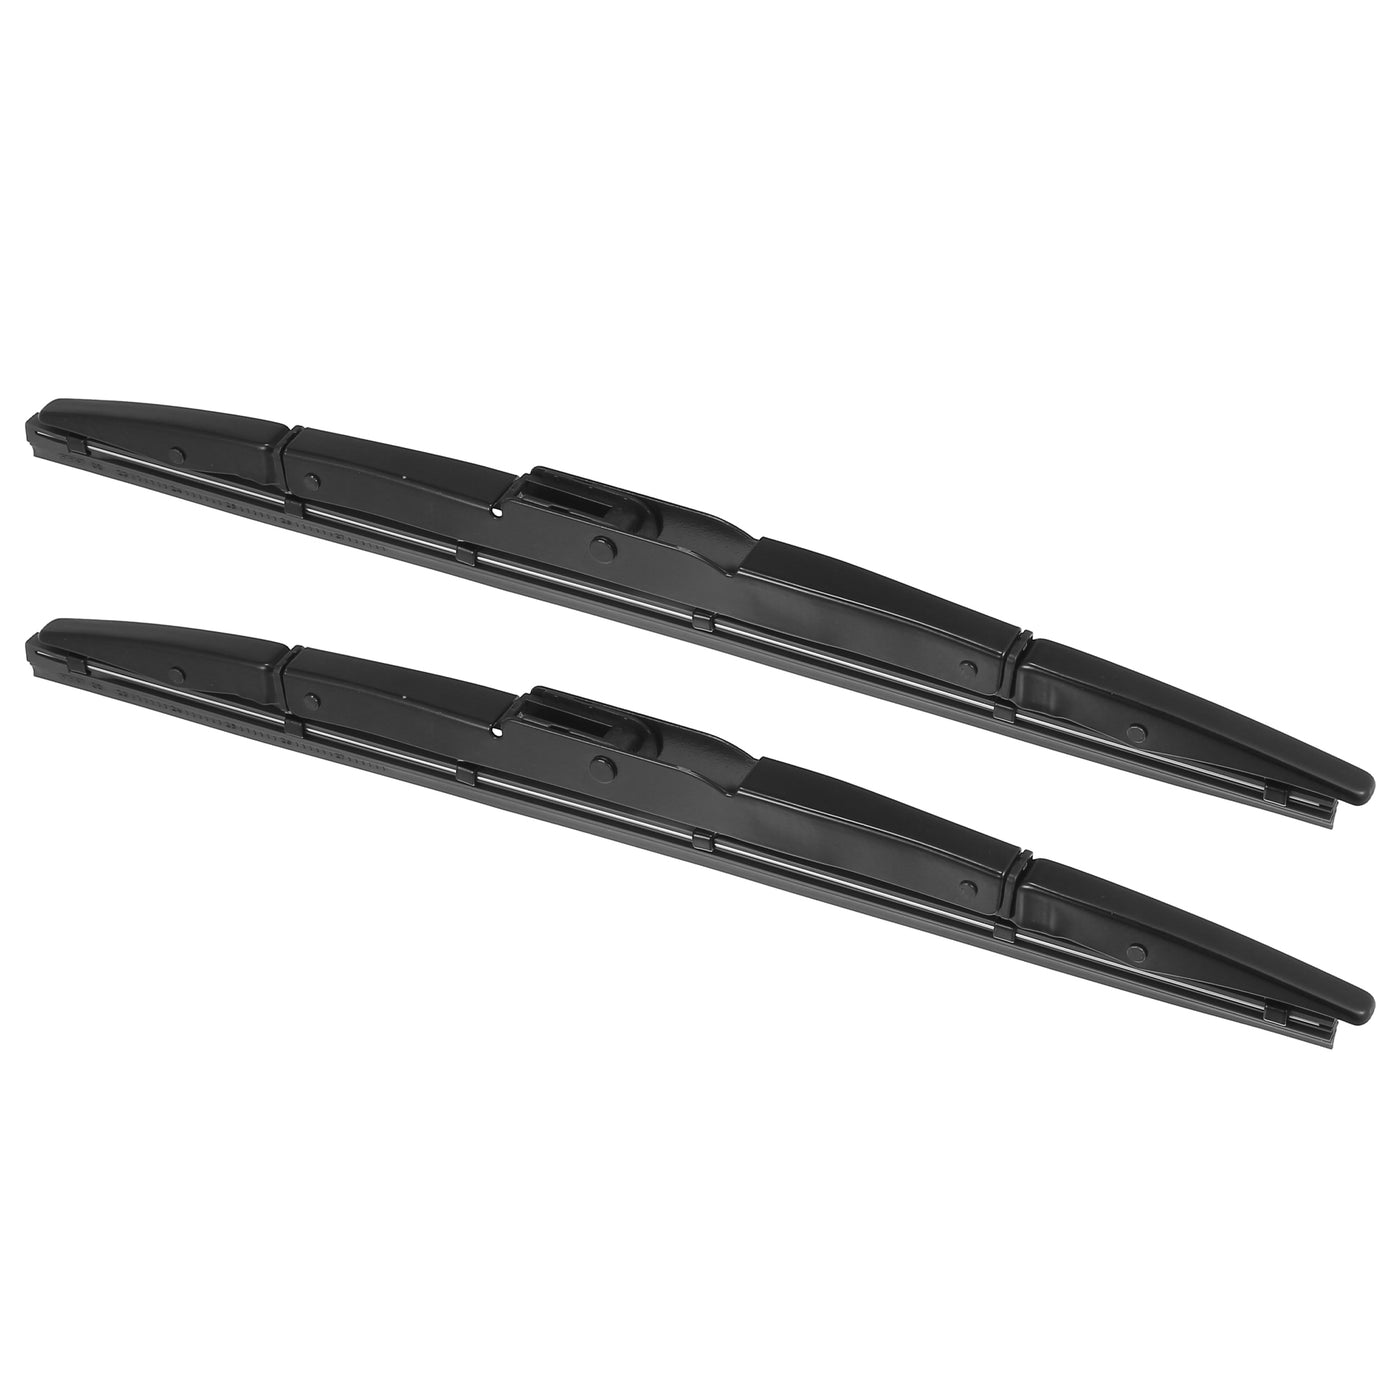 X AUTOHAUX 2pcs Rear Windshield Wiper Blade Replacement for Honda CR-V 2012 2013 2014 2015 2016